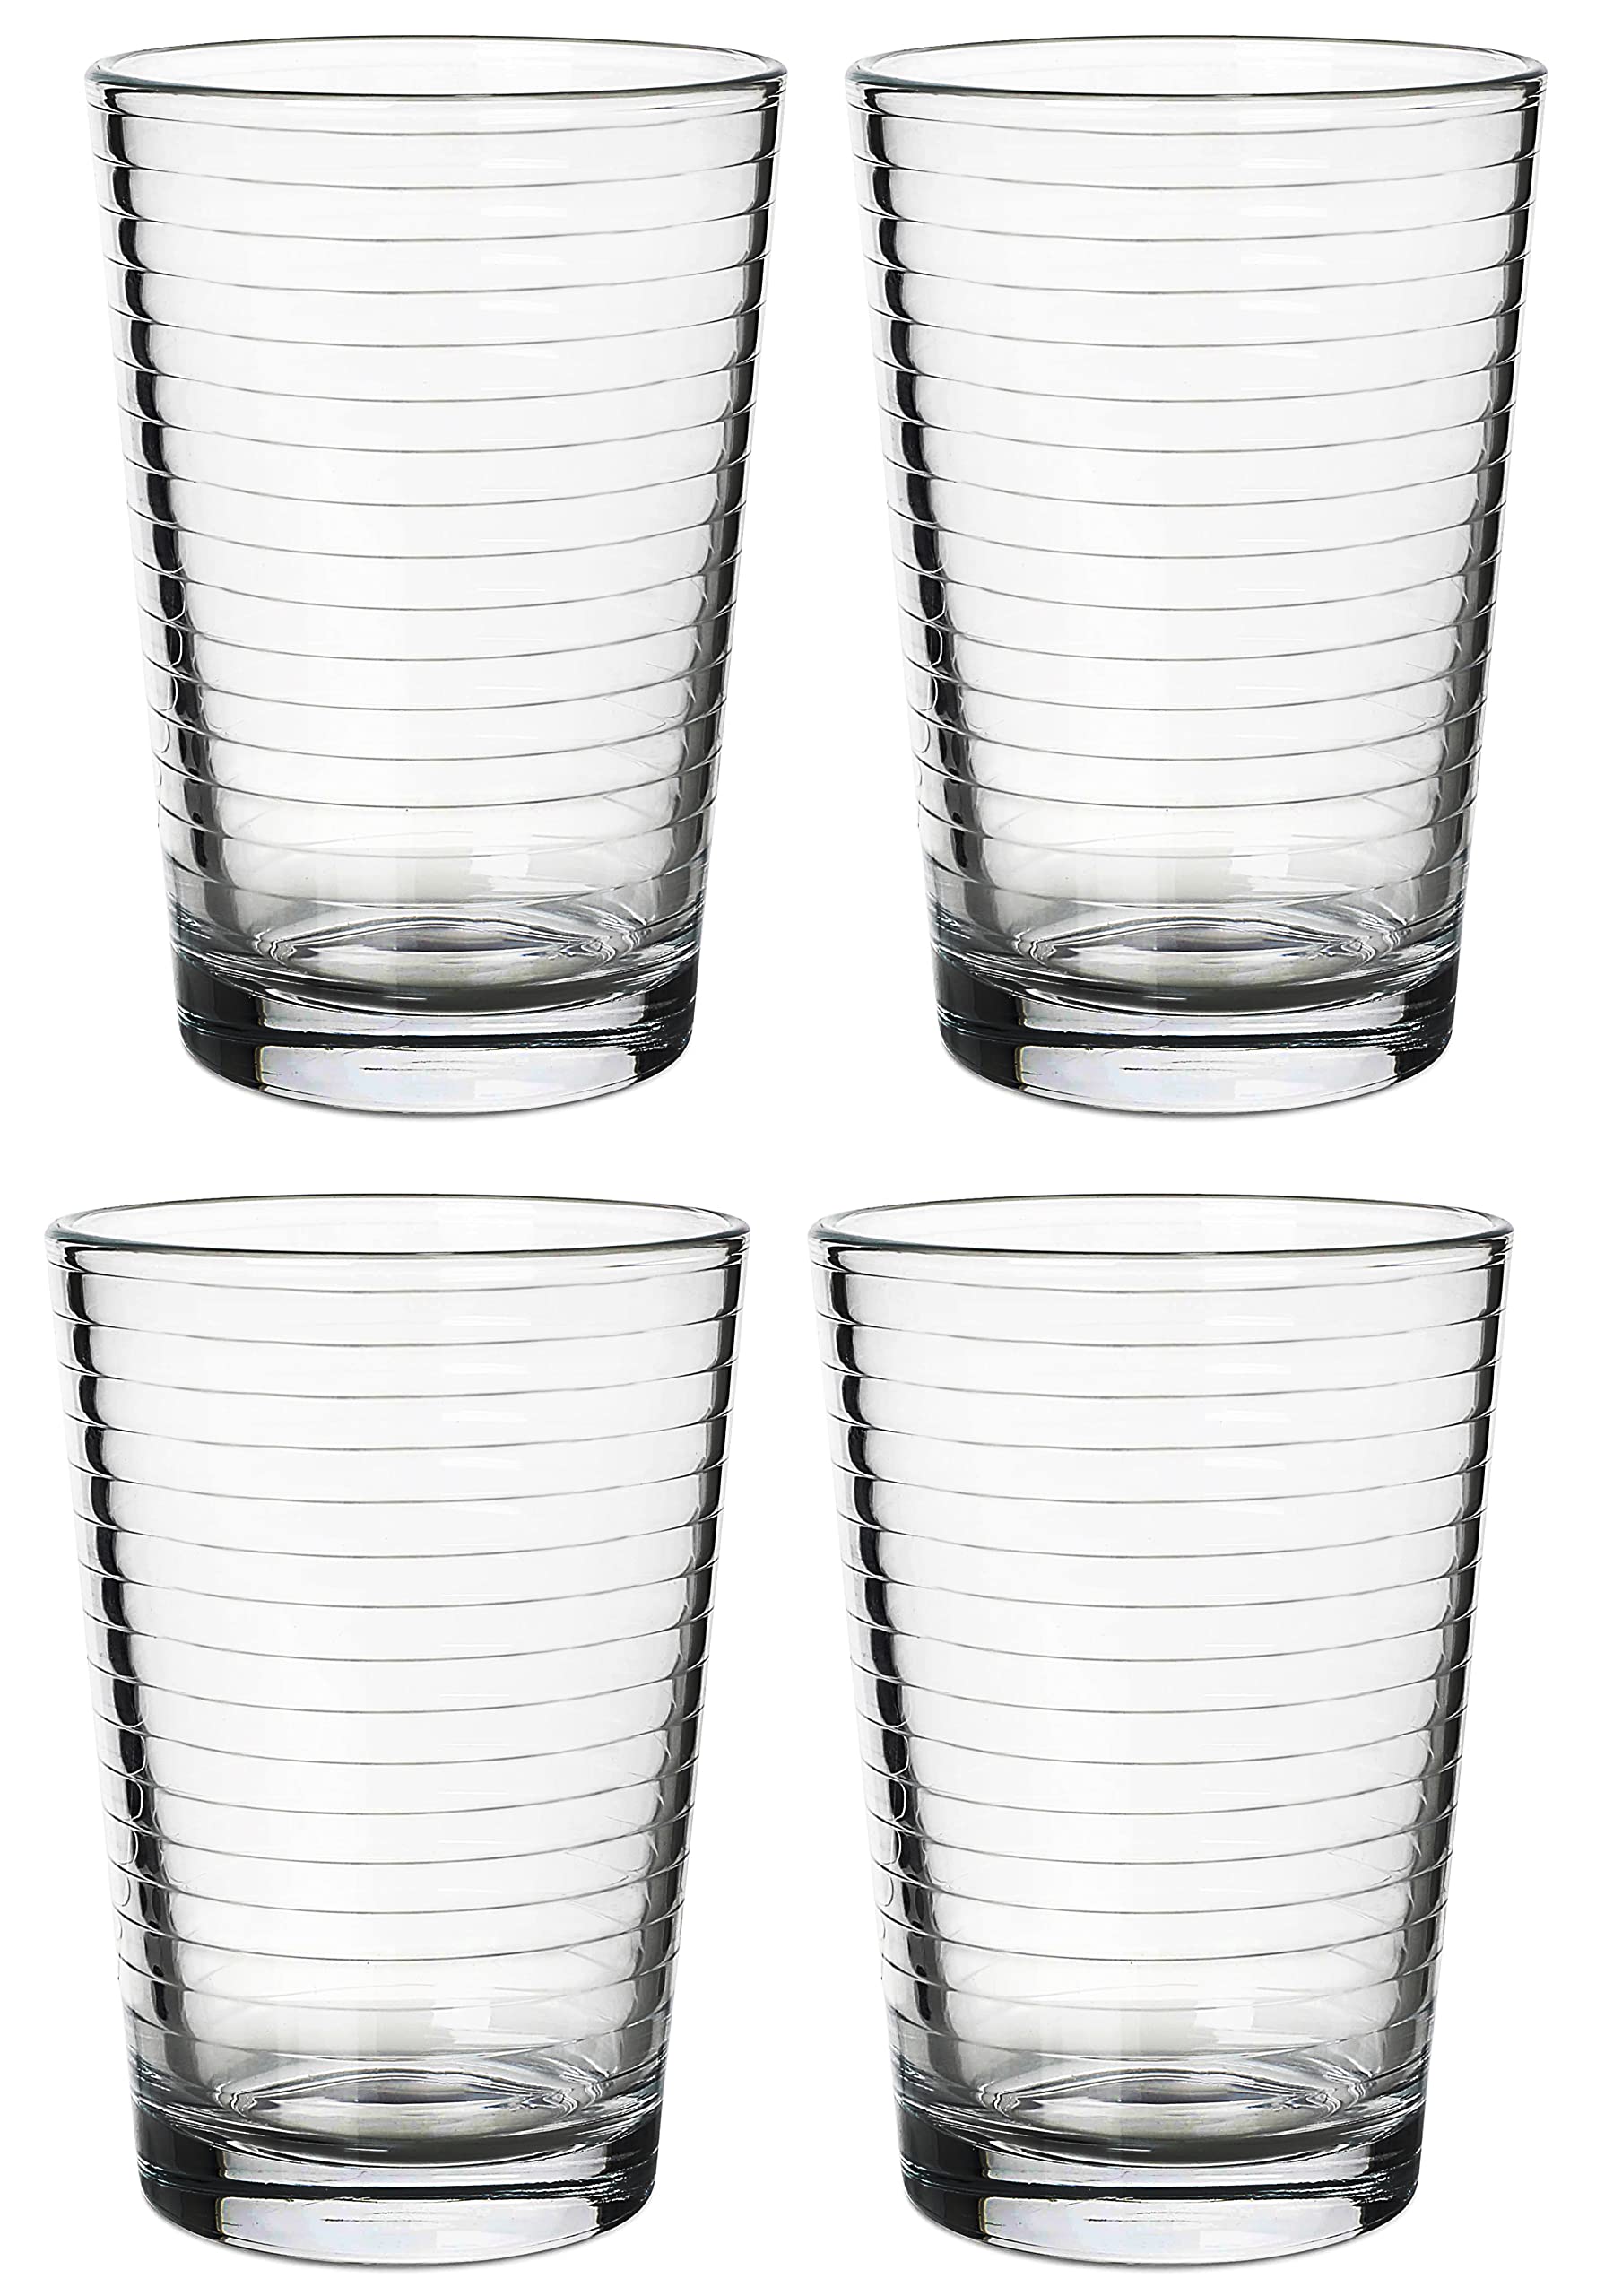 YUMCHIKEL Juice glasses 7 oz Set Of 4 glass cups - By Yumchikel - Drinking glass for Soda, Juice, Milk, coke, and Spirits, Durable and Dis